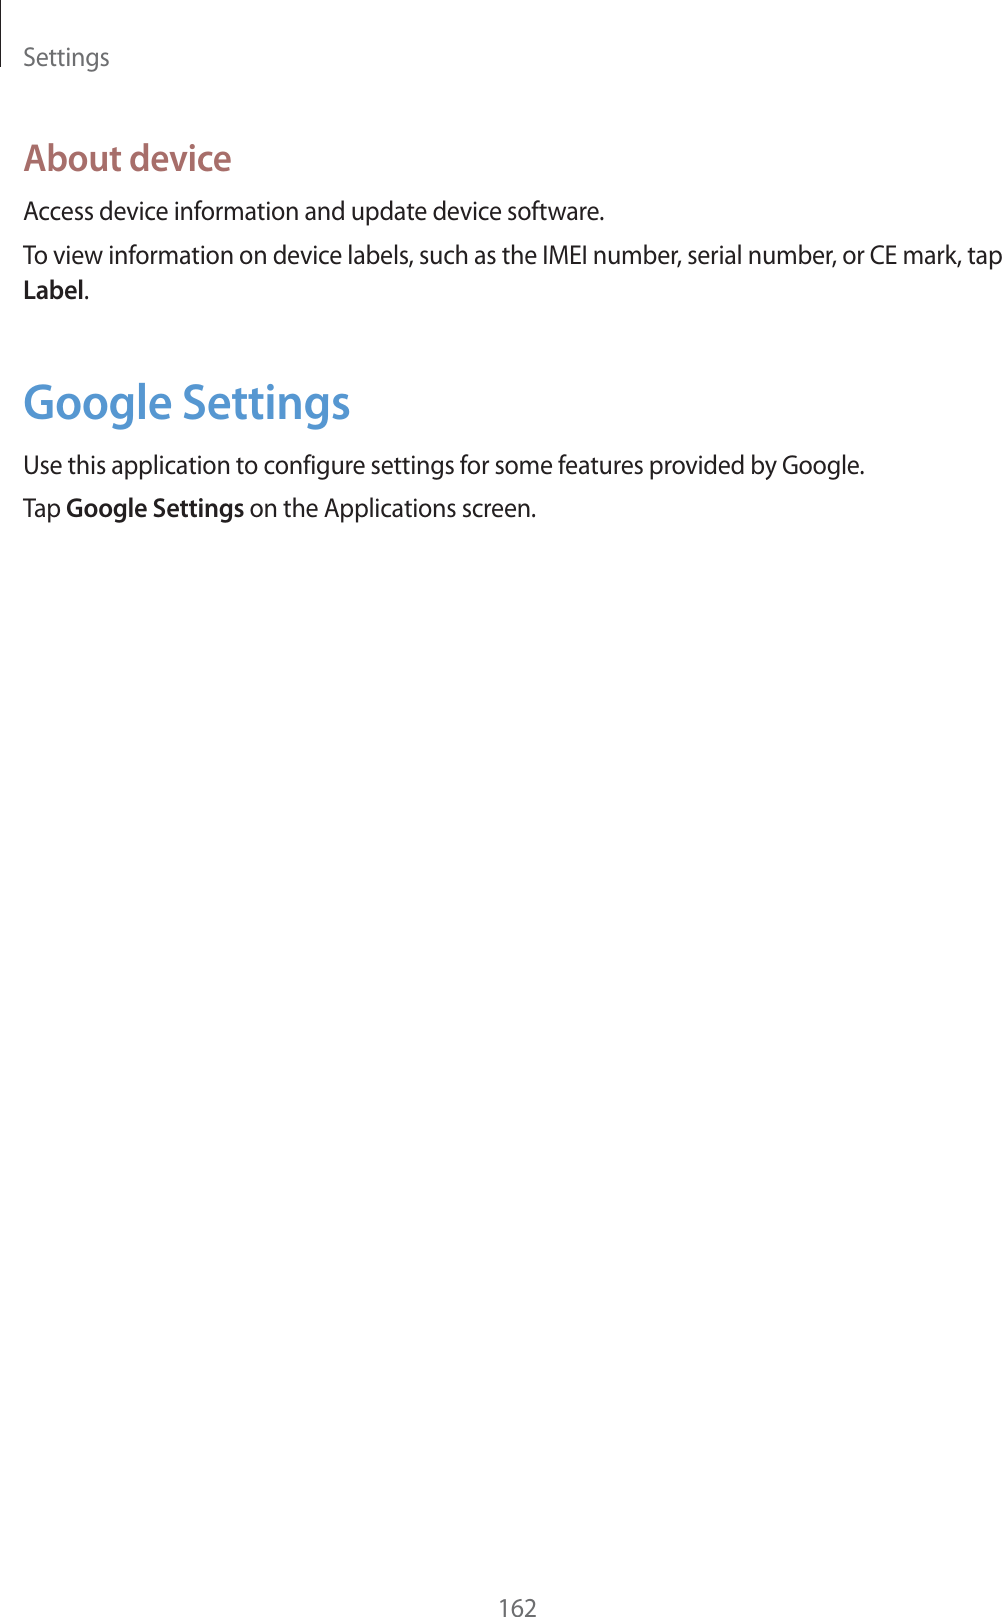 Settings162About deviceAccess device information and update device software.To view information on device labels, such as the IMEI number, serial number, or CE mark, tap Label.Google SettingsUse this application to configure settings for some features provided by Google.Tap Google Settings on the Applications screen.